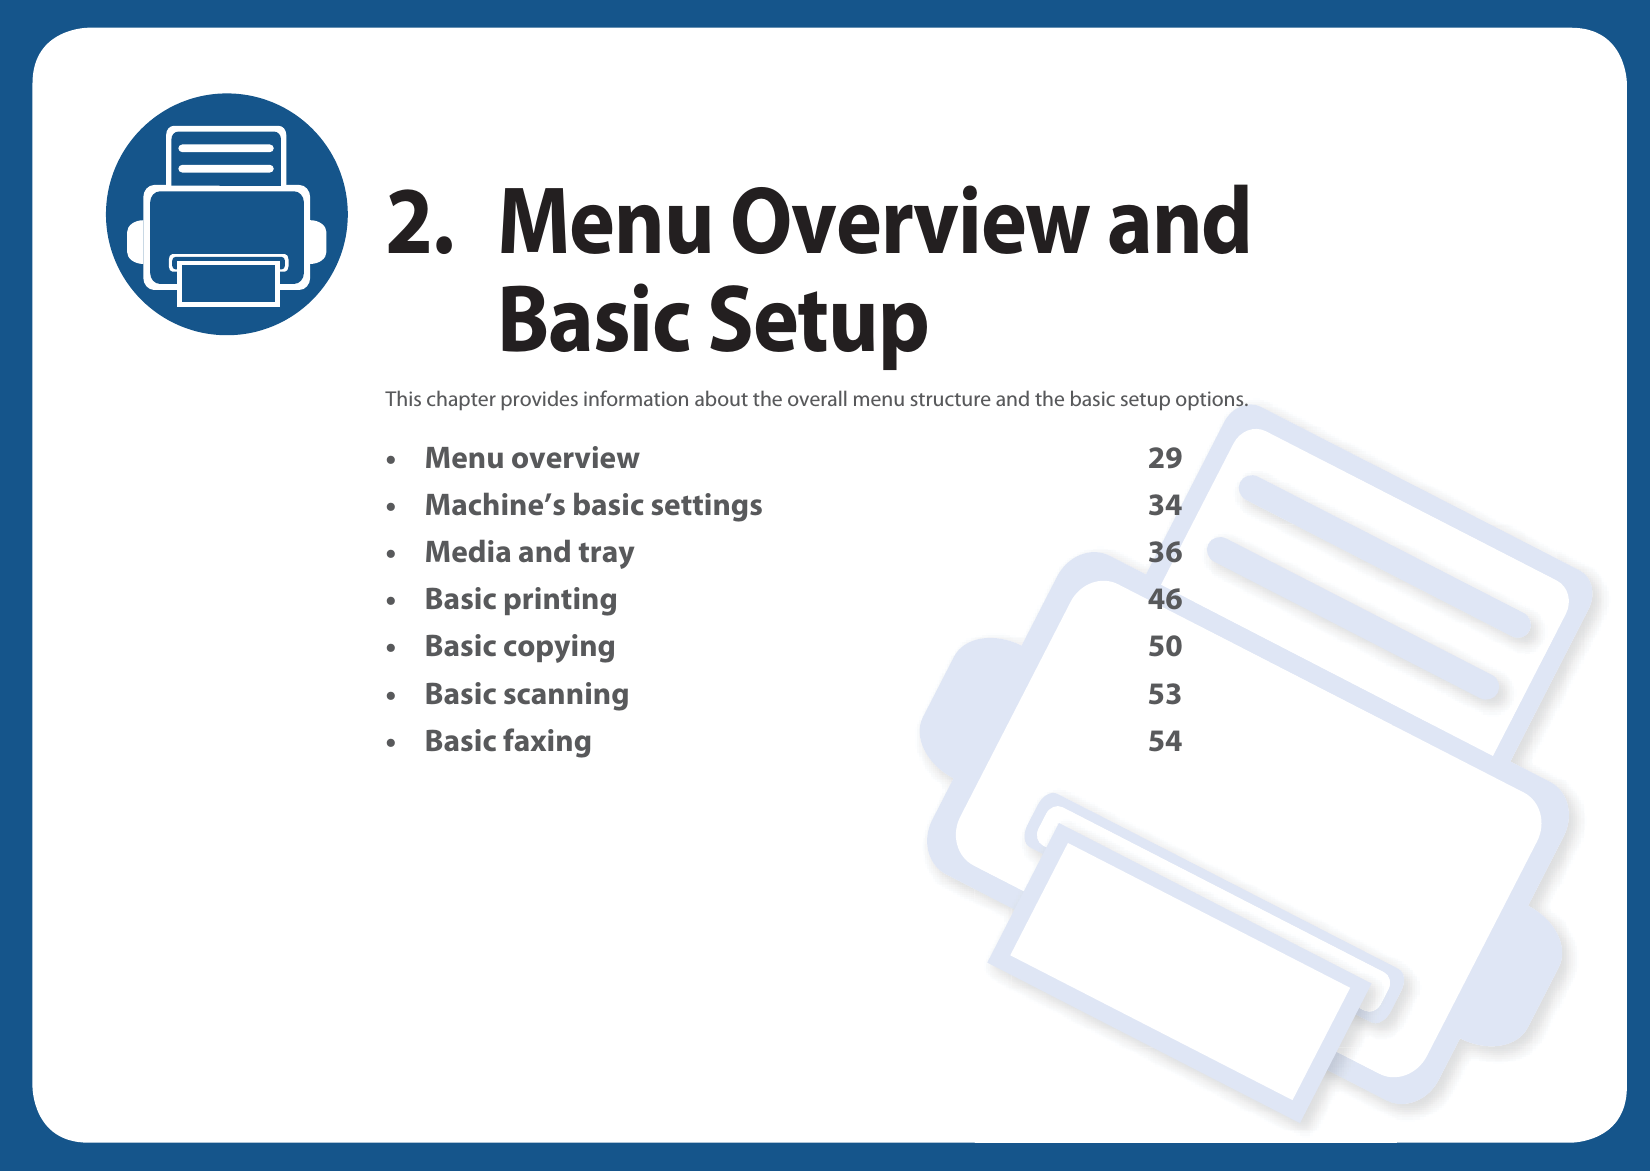 2. Menu Overview and Basic SetupThis chapter provides information about the overall menu structure and the basic setup options.• Menu overview 29• Machine’s basic settings 34• Media and tray 36• Basic printing 46• Basic copying 50• Basic scanning 53• Basic faxing 54